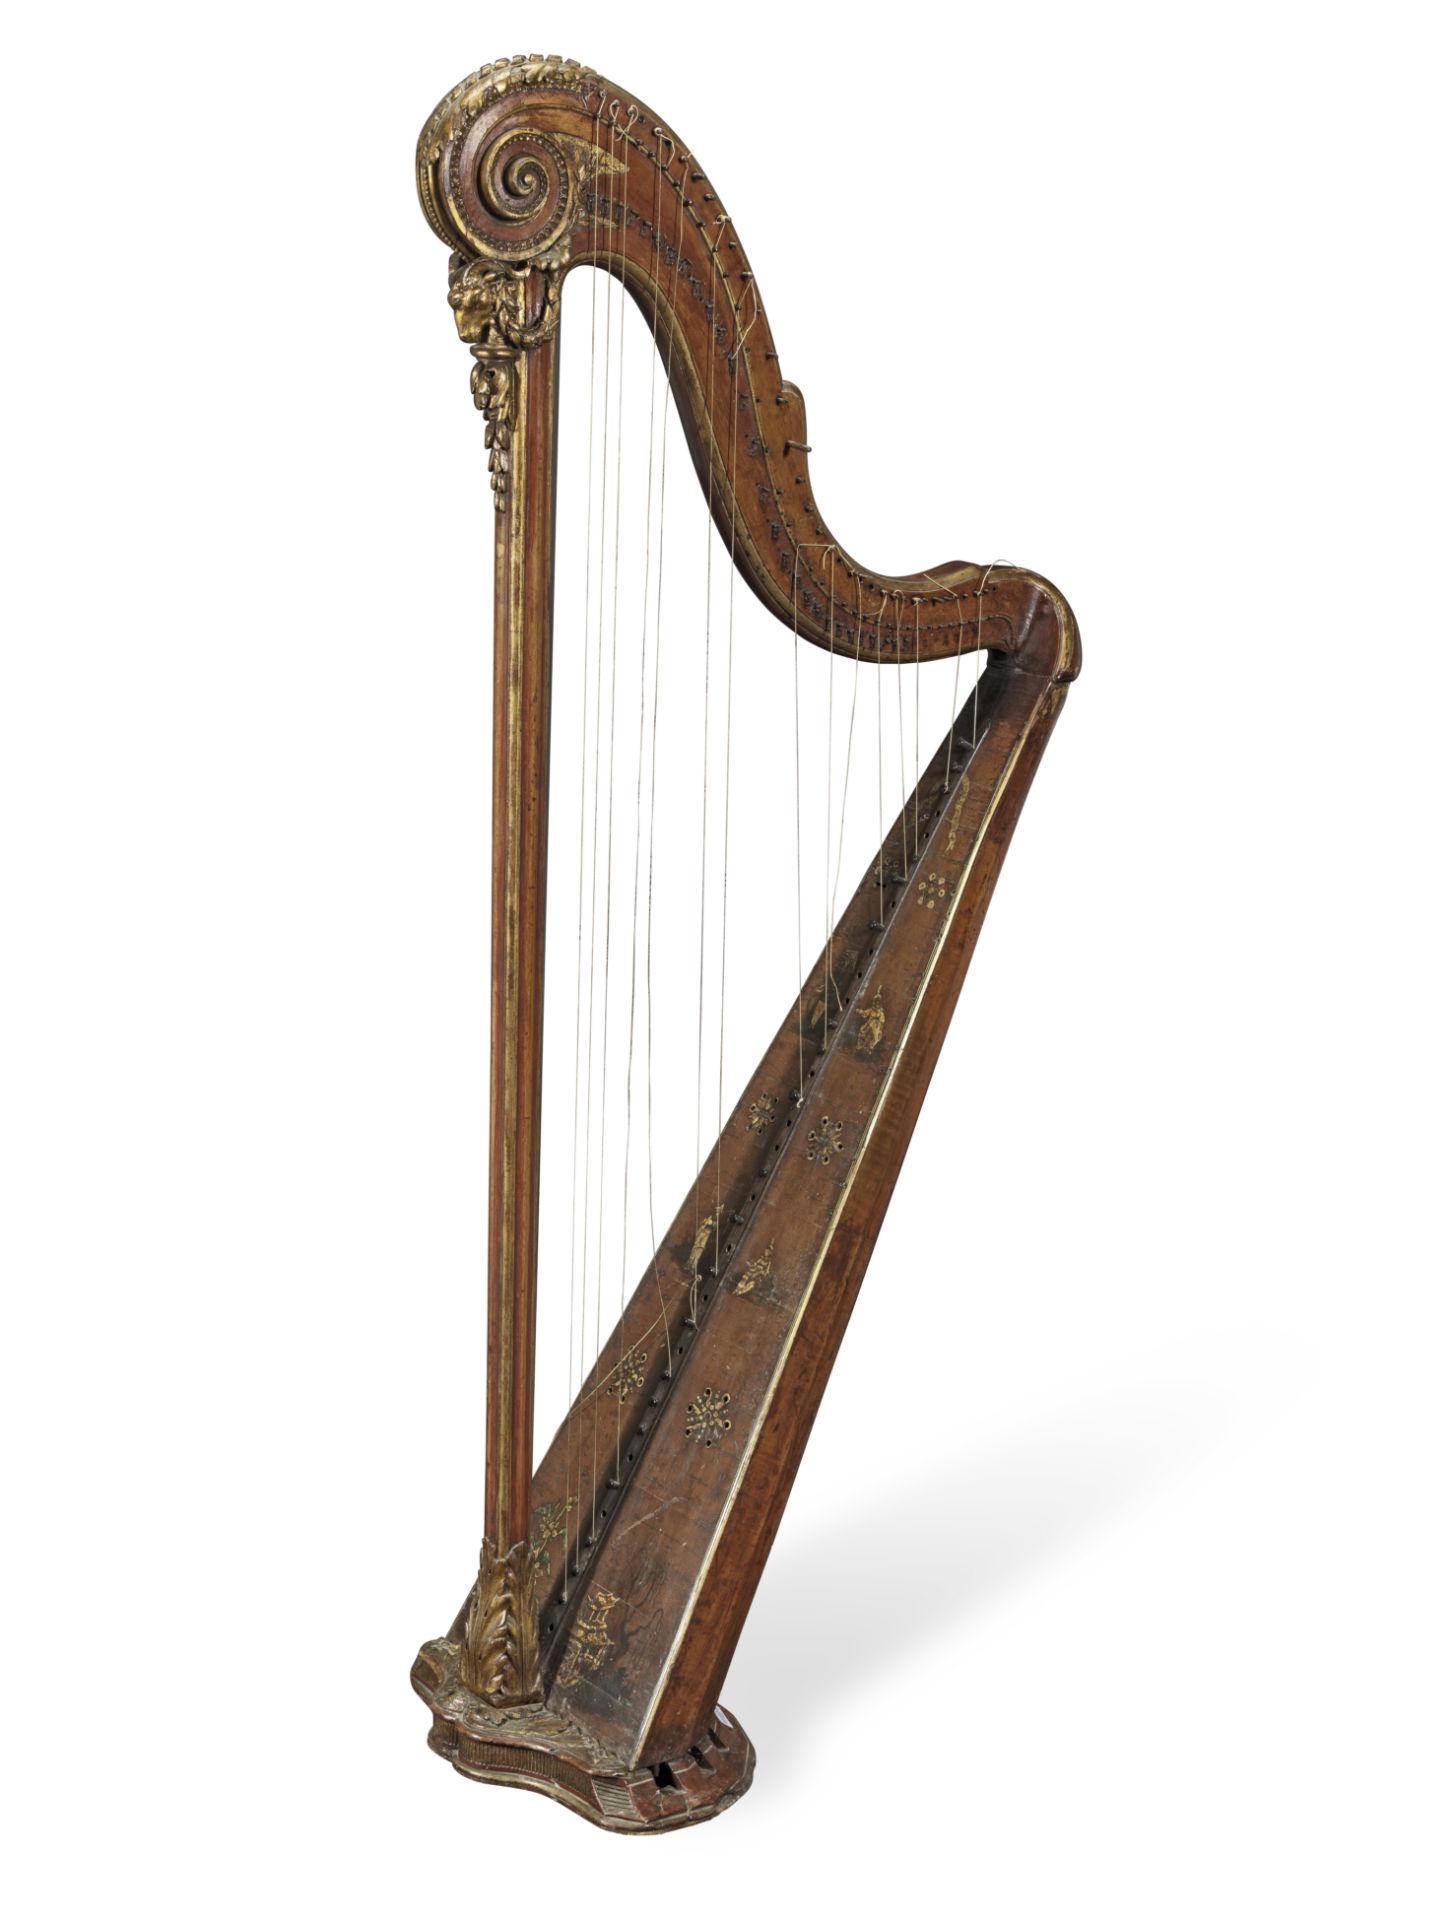 A late 18th/early 19th century French polychrome decorated and parcel gilt pedal harp by George ...